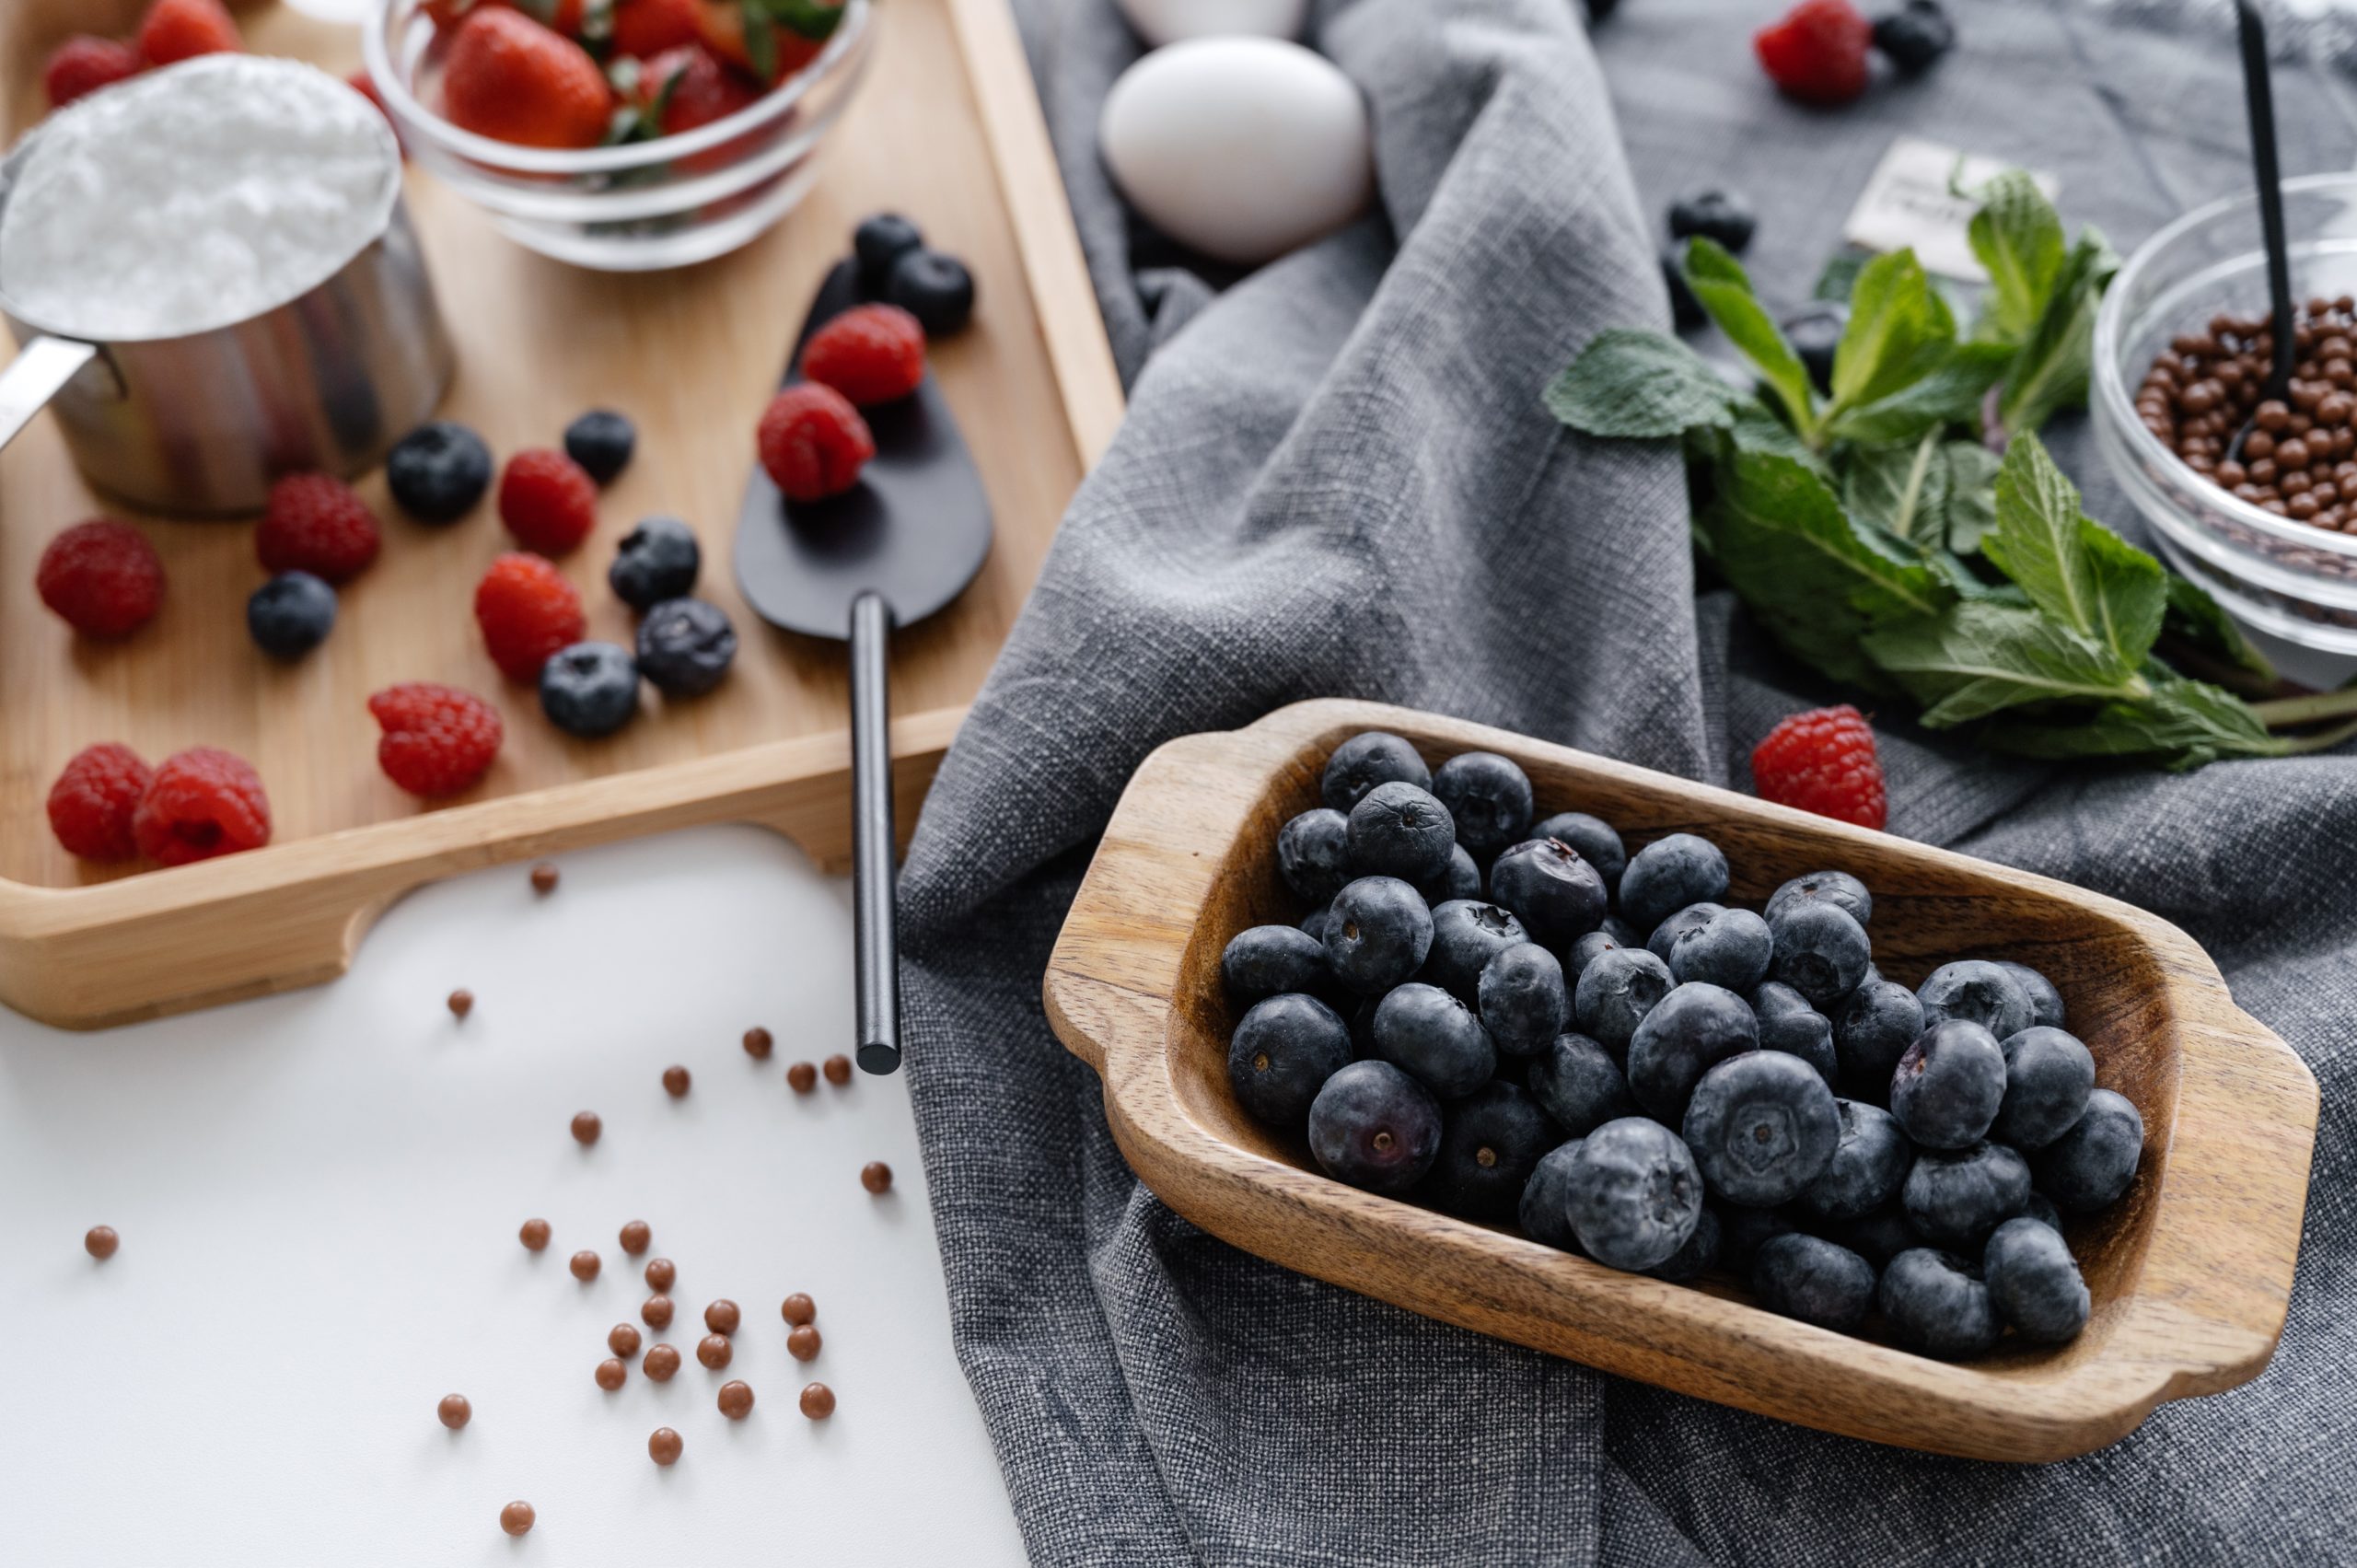 Bowl of blueberries. They are rich in antioxidants which help protect our brain health. Image from Pexels.